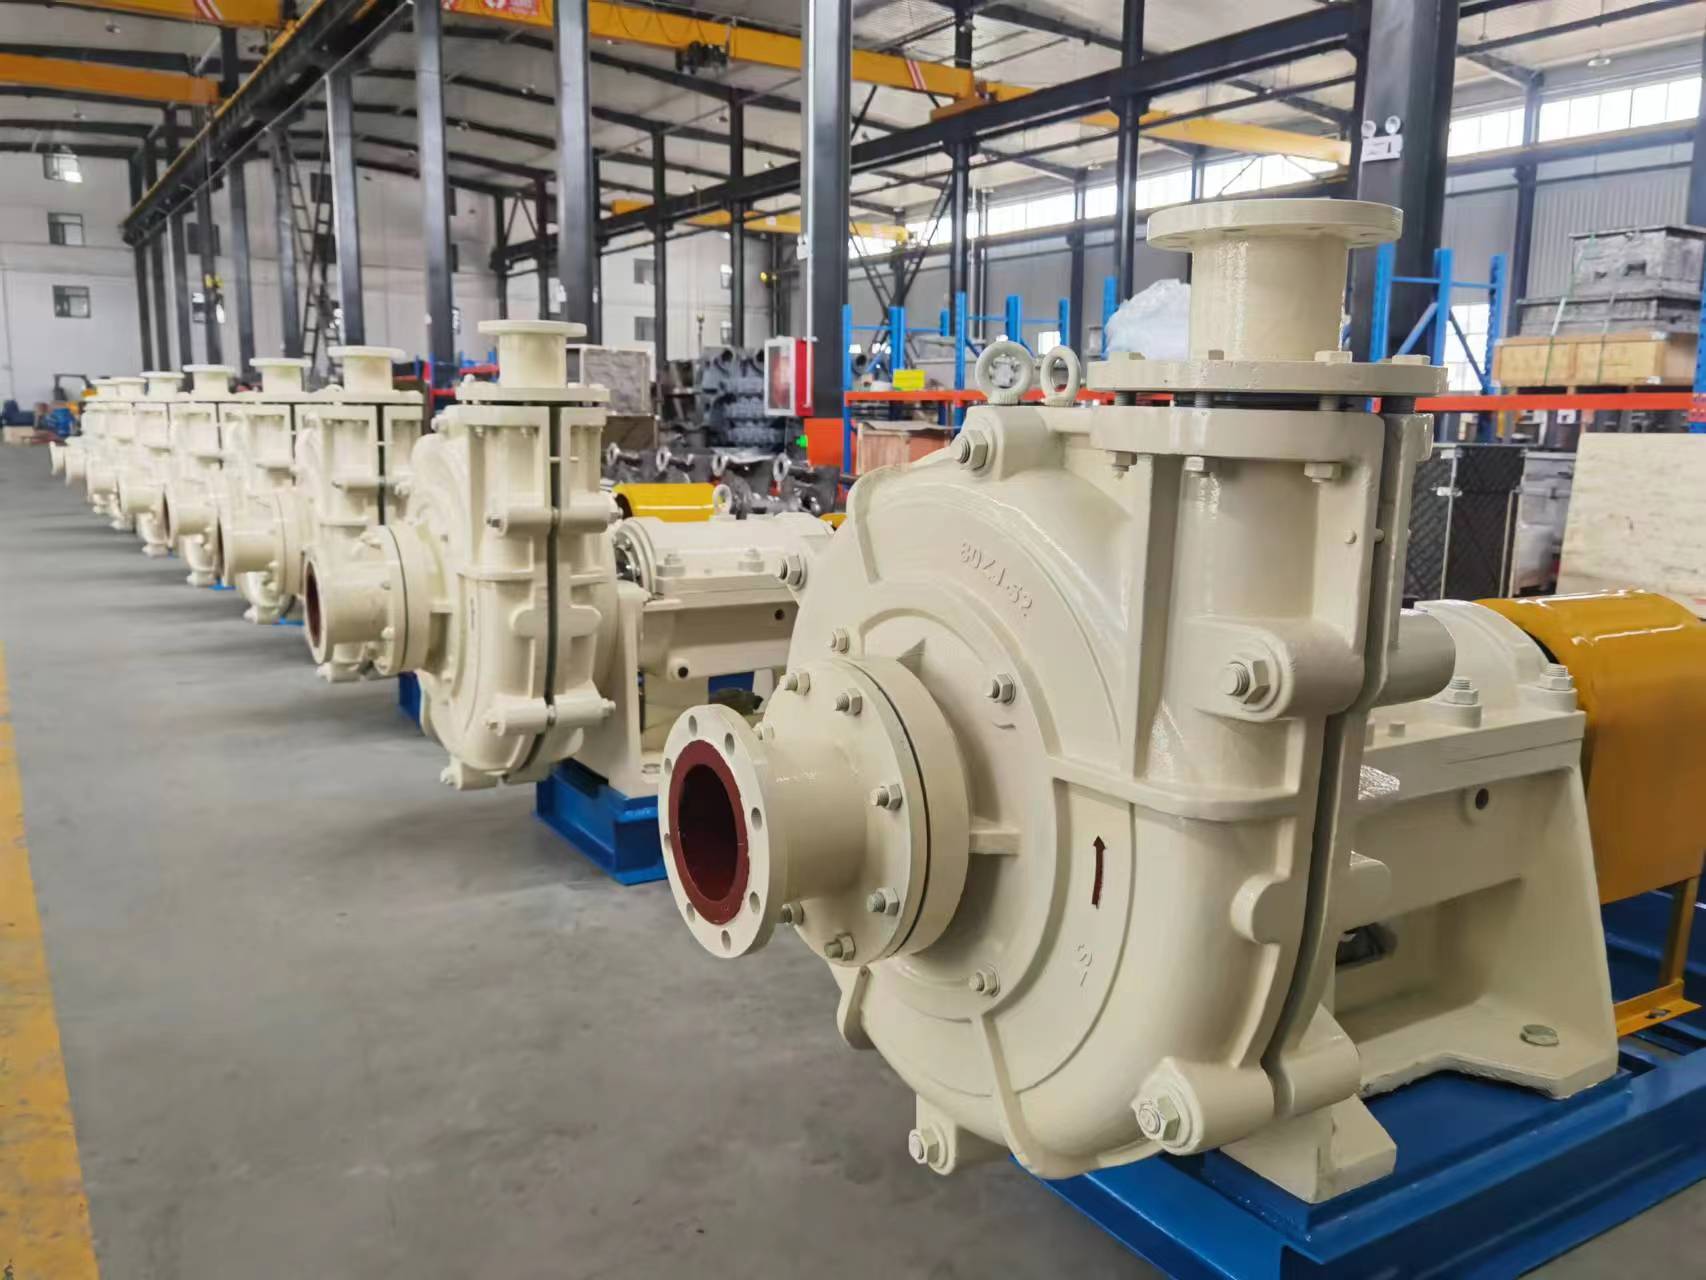 Pansto is a Chinese pump and associated equipment supply company that specializes in the design and consulting, sales, manufacturing and install...